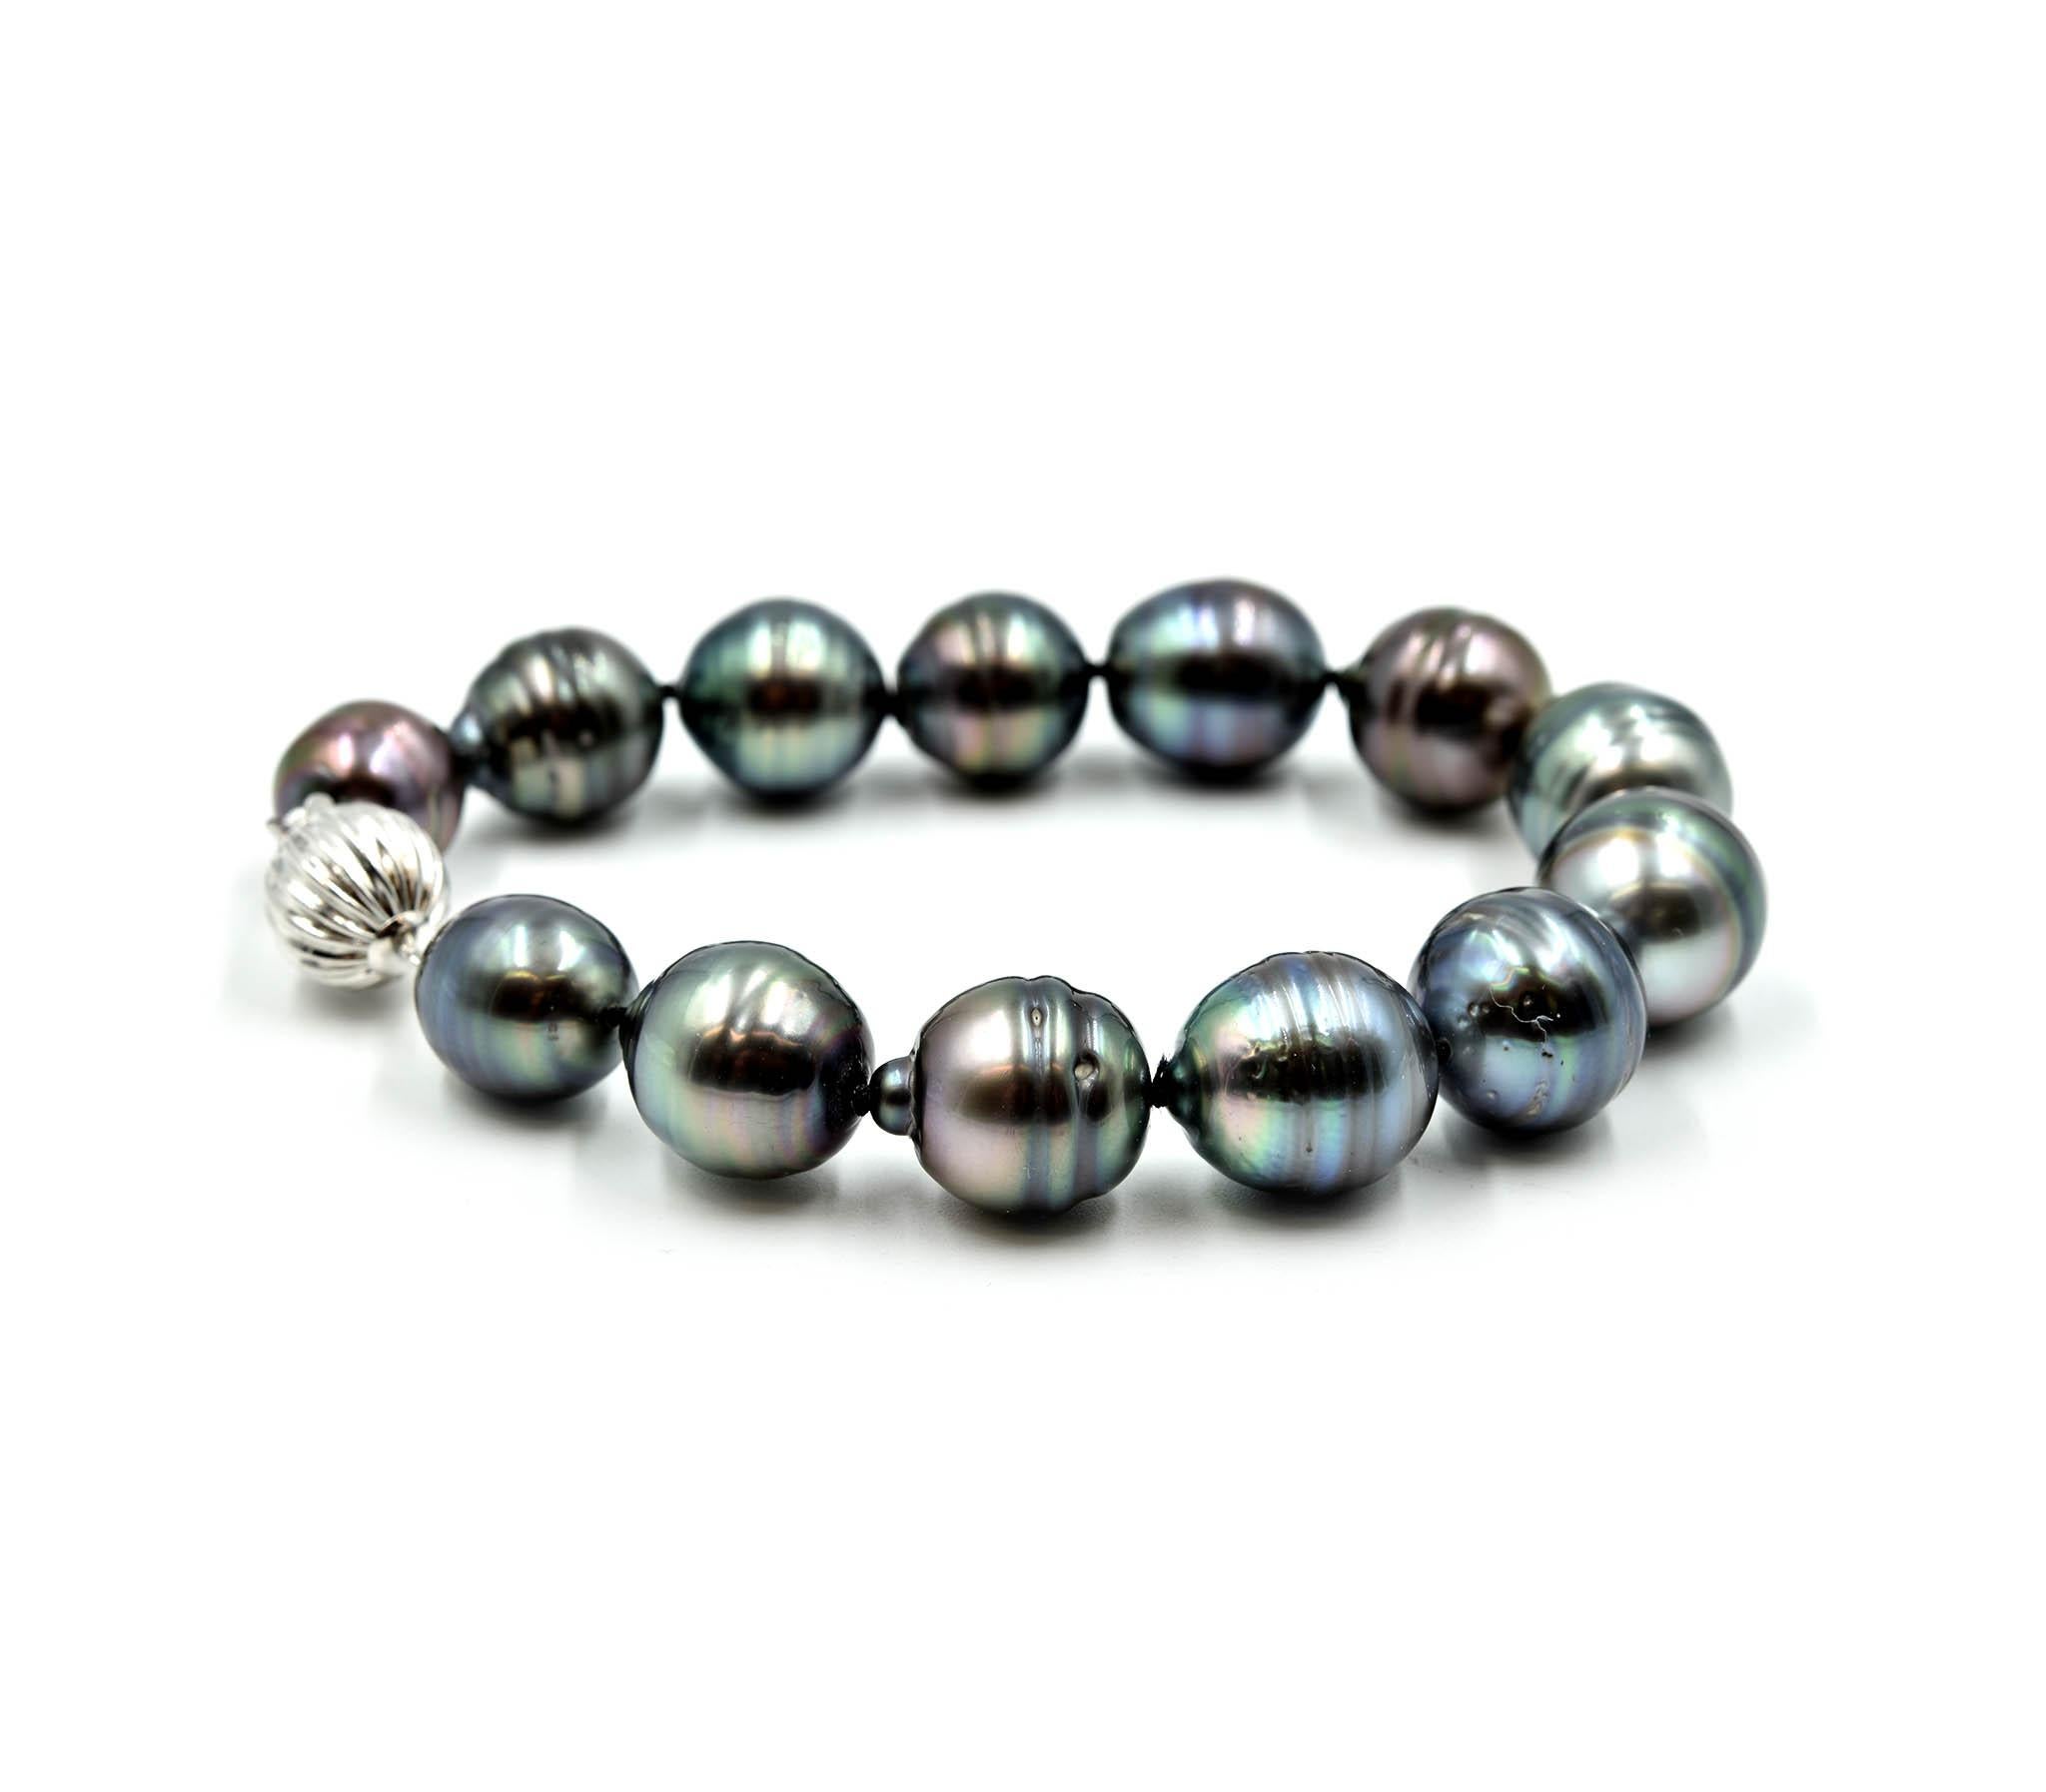 Designer: custom design
Material: 14k white gold clasp
Pearls: 12mm – 12.50mm black baroque pearls
Dimensions: bracelet is 7 ½ inches long and ½ inch wide
Weight: 36.73 grams
